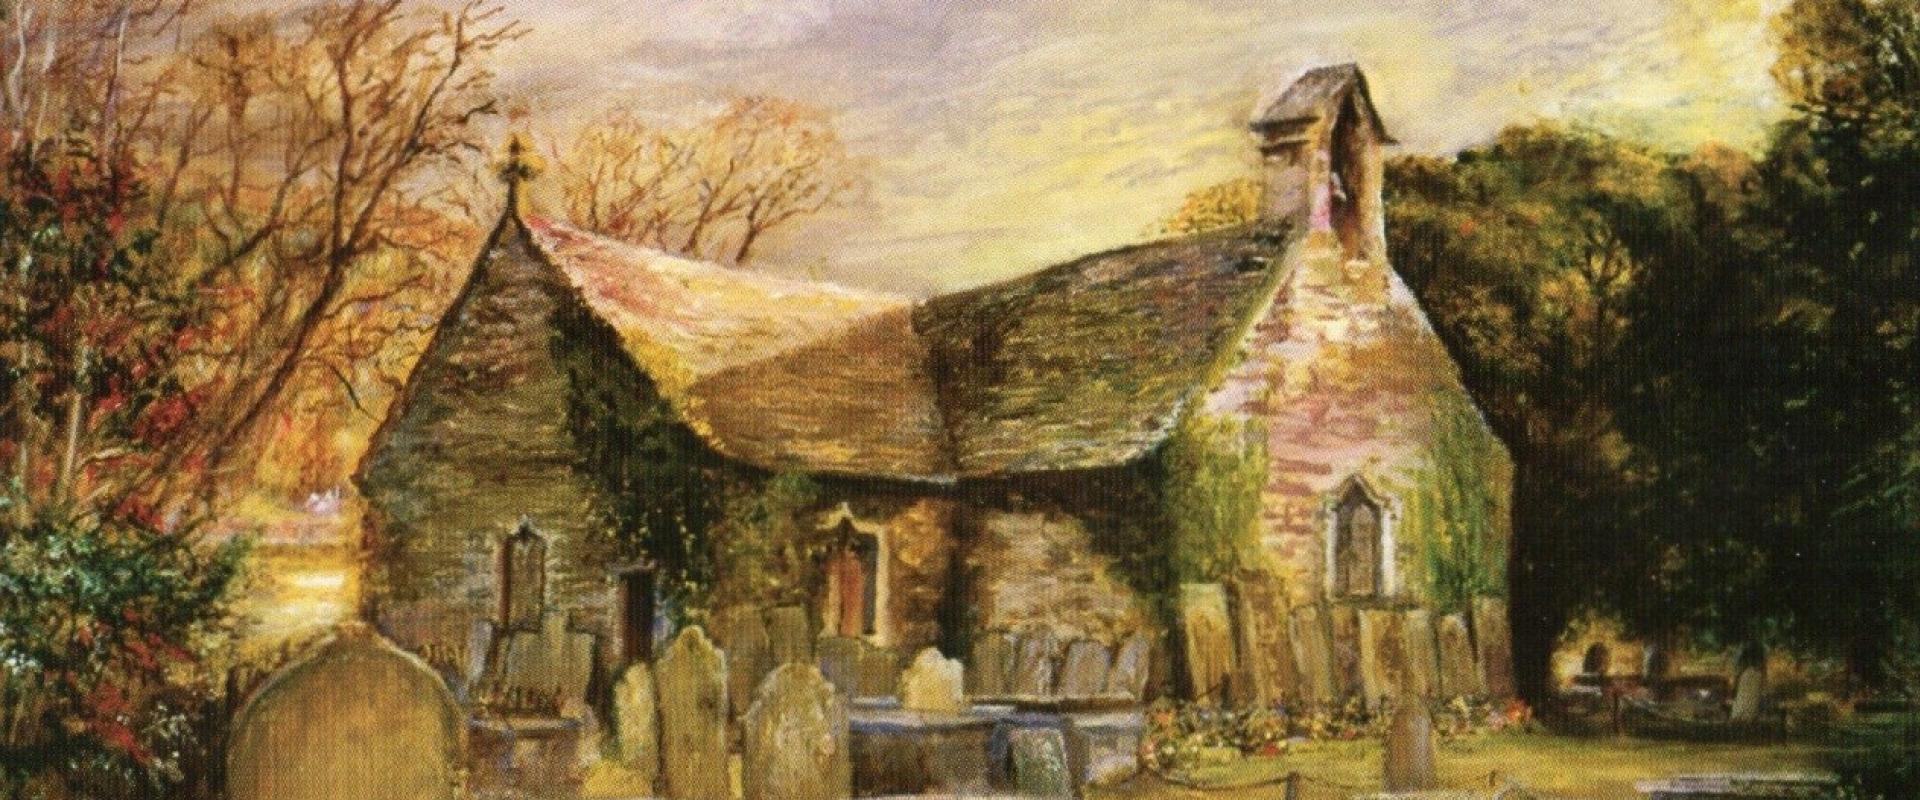 oil painting of St Michael's Old Church, Betws y Coed